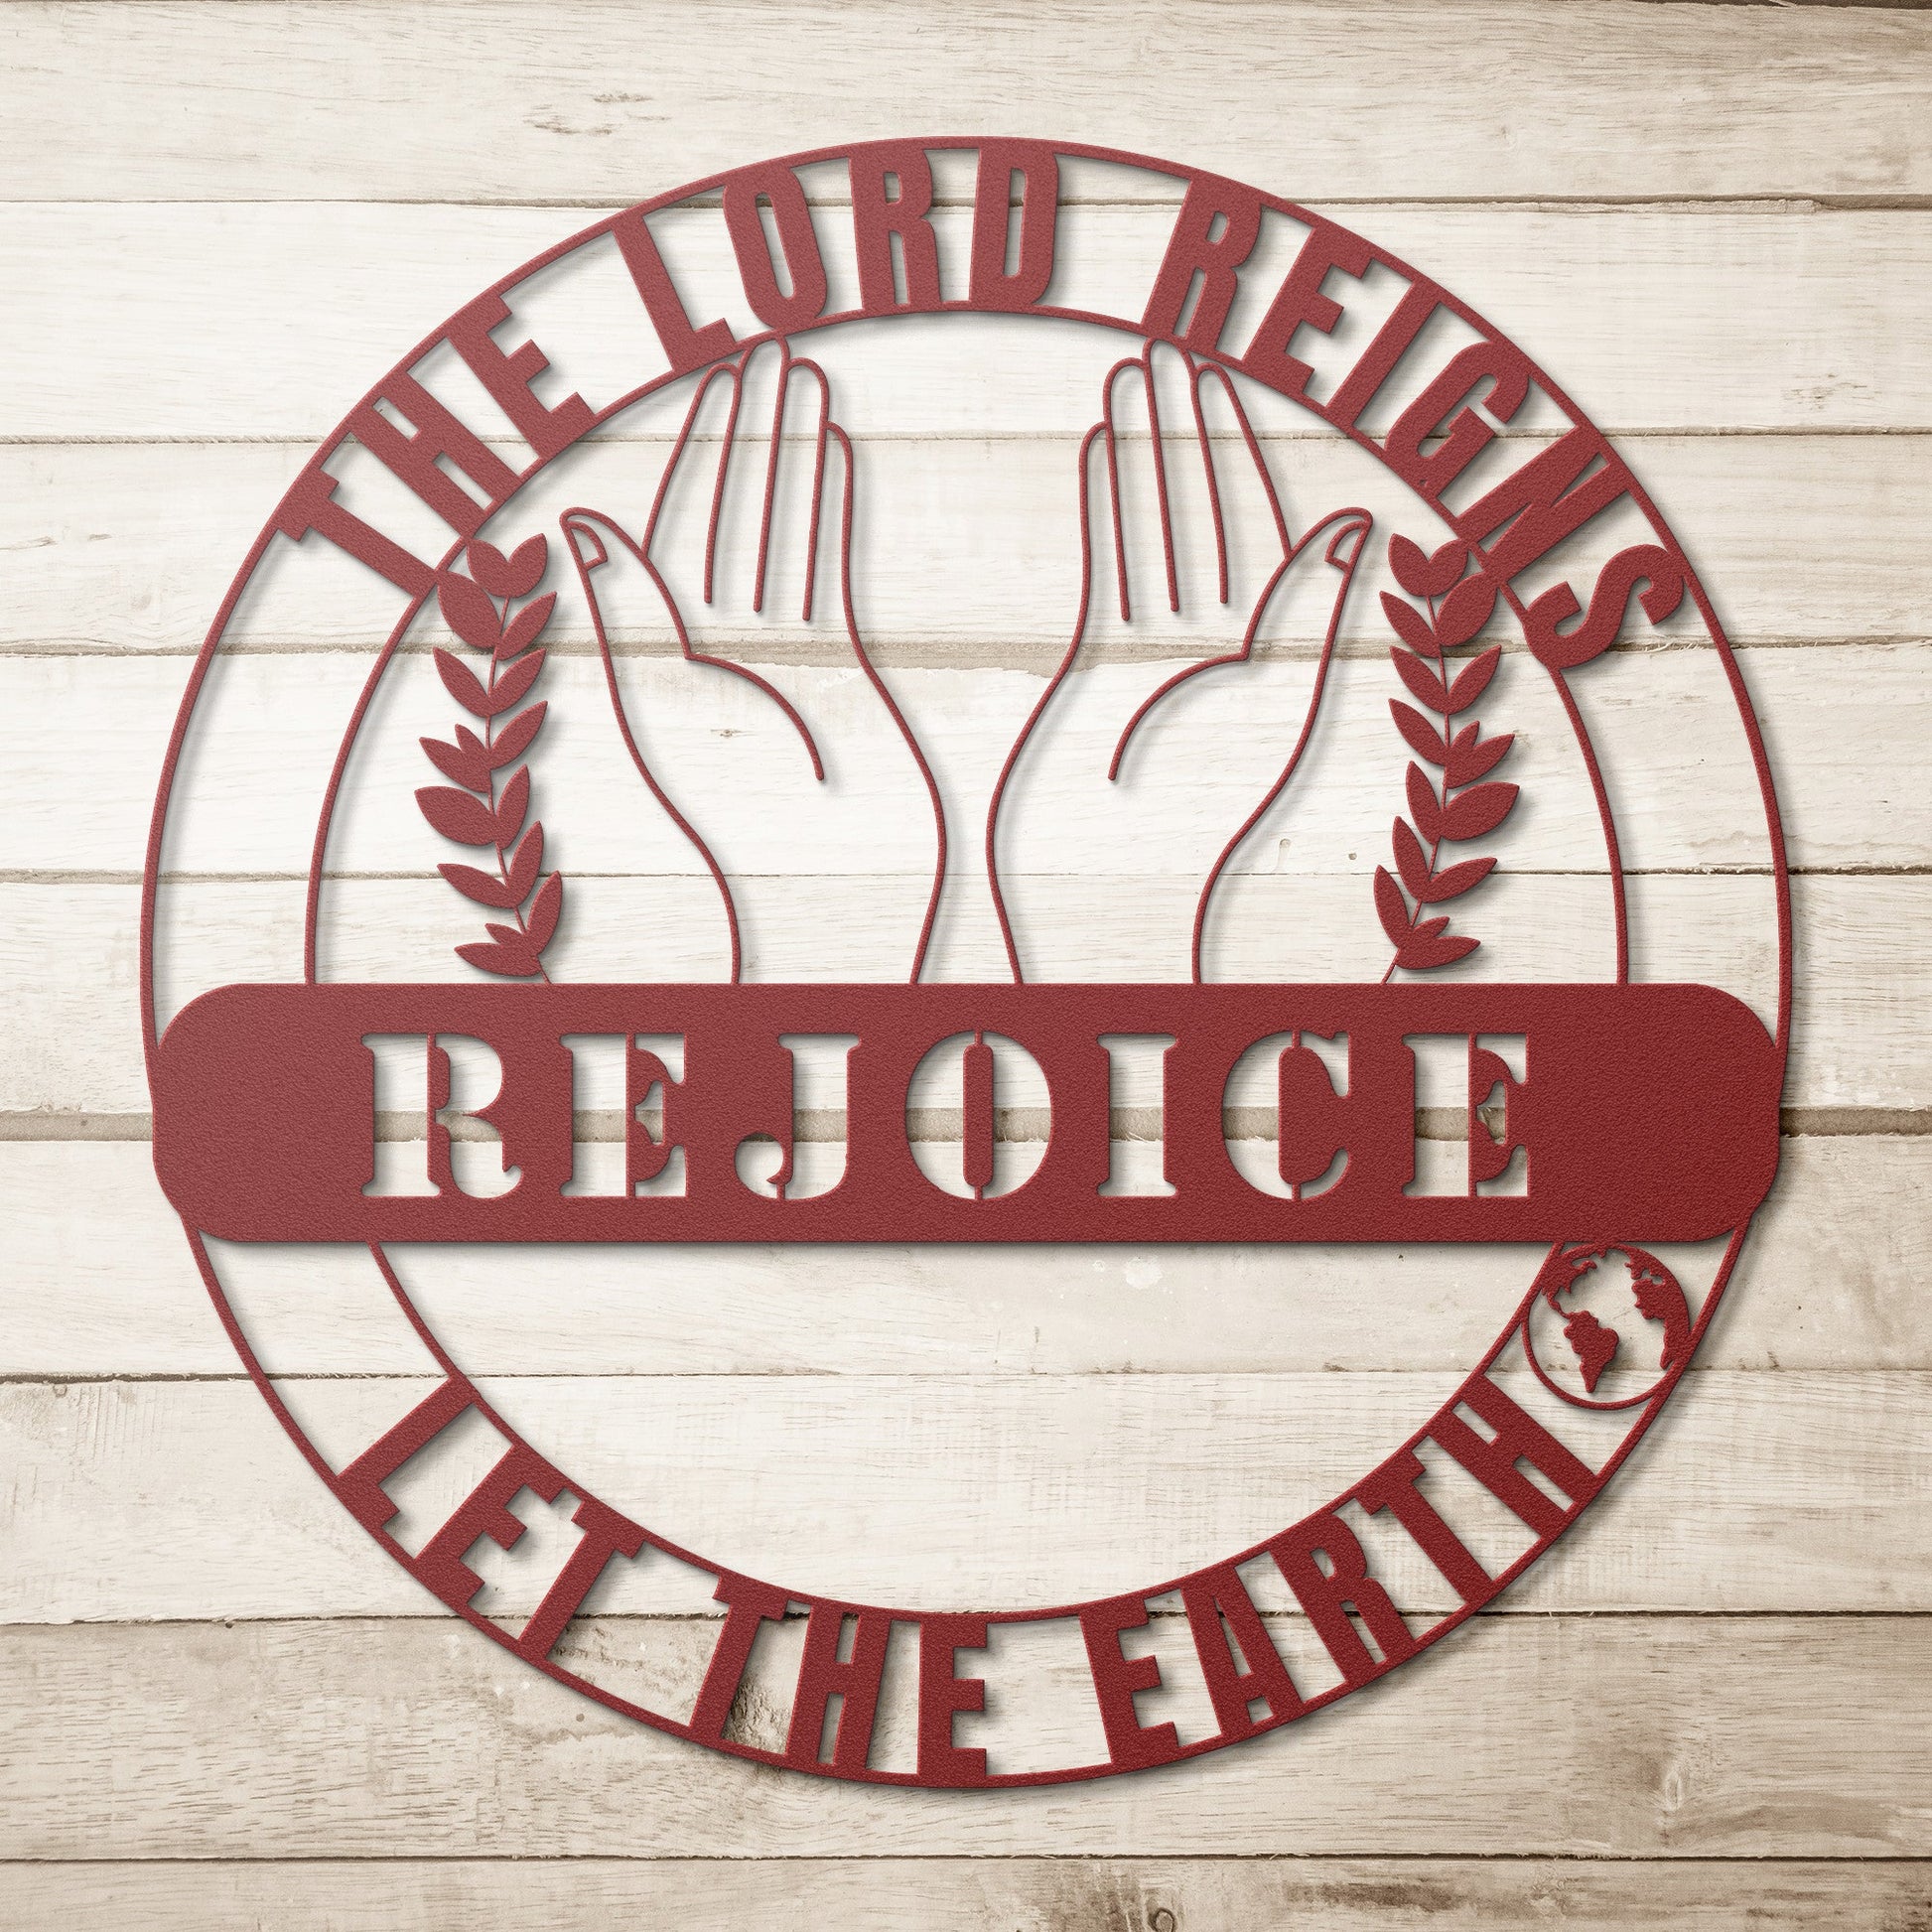 Pslam 91: The Lord Reigns; Let The Earth Rejoice Metal Wall Art Sign-Wall Art-mysticalcherry